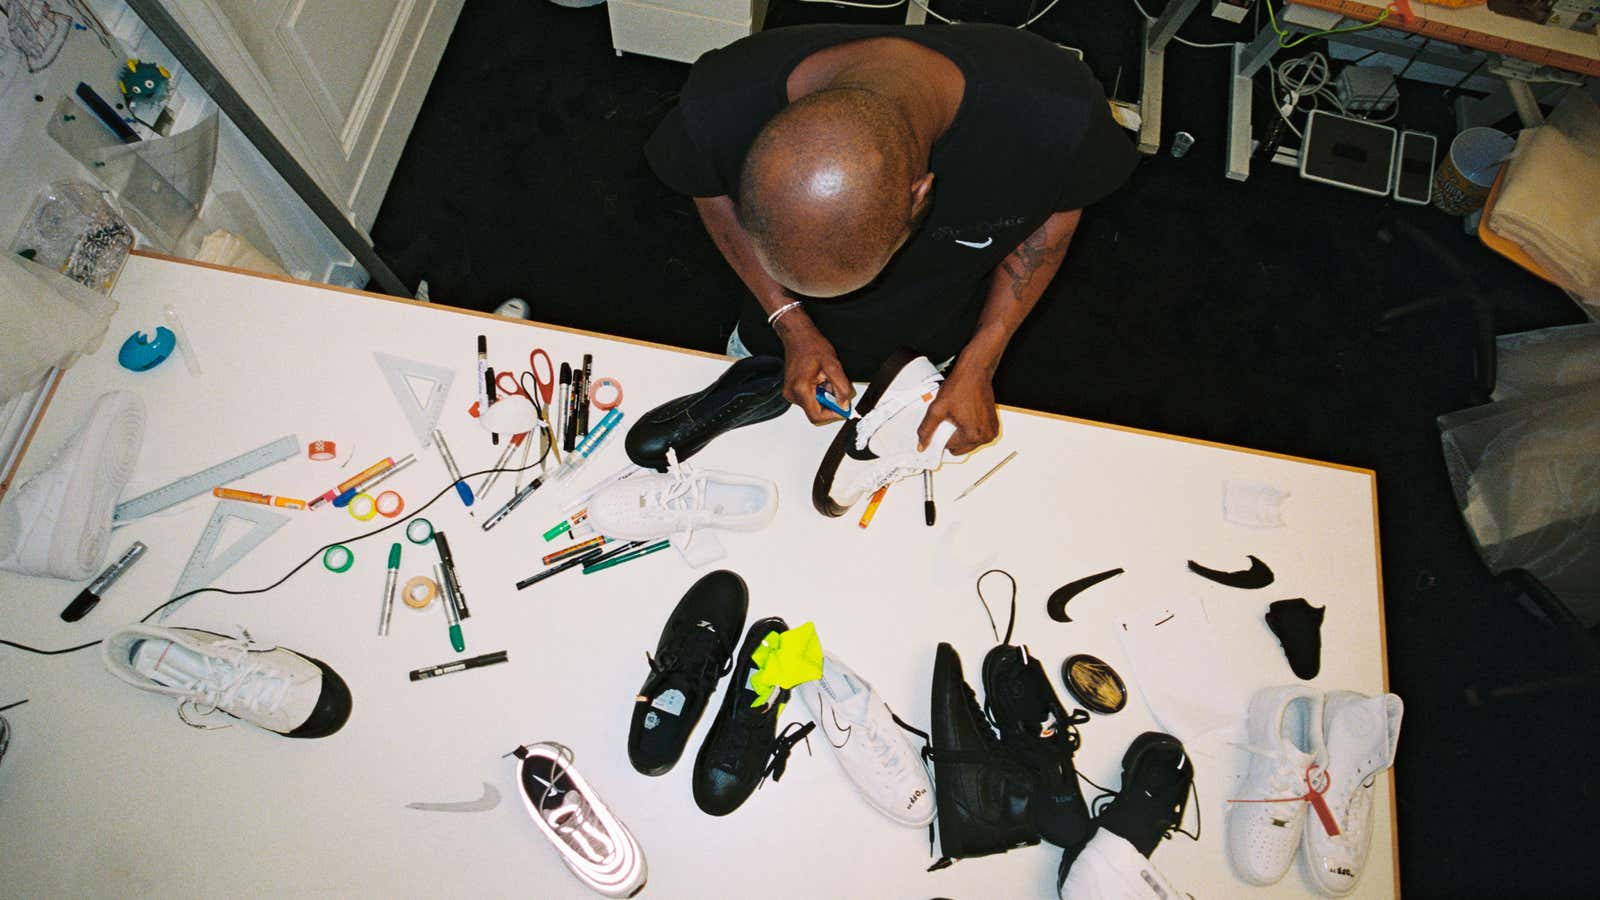 A new book is documenting Virgil Abloh's partnership with Nike